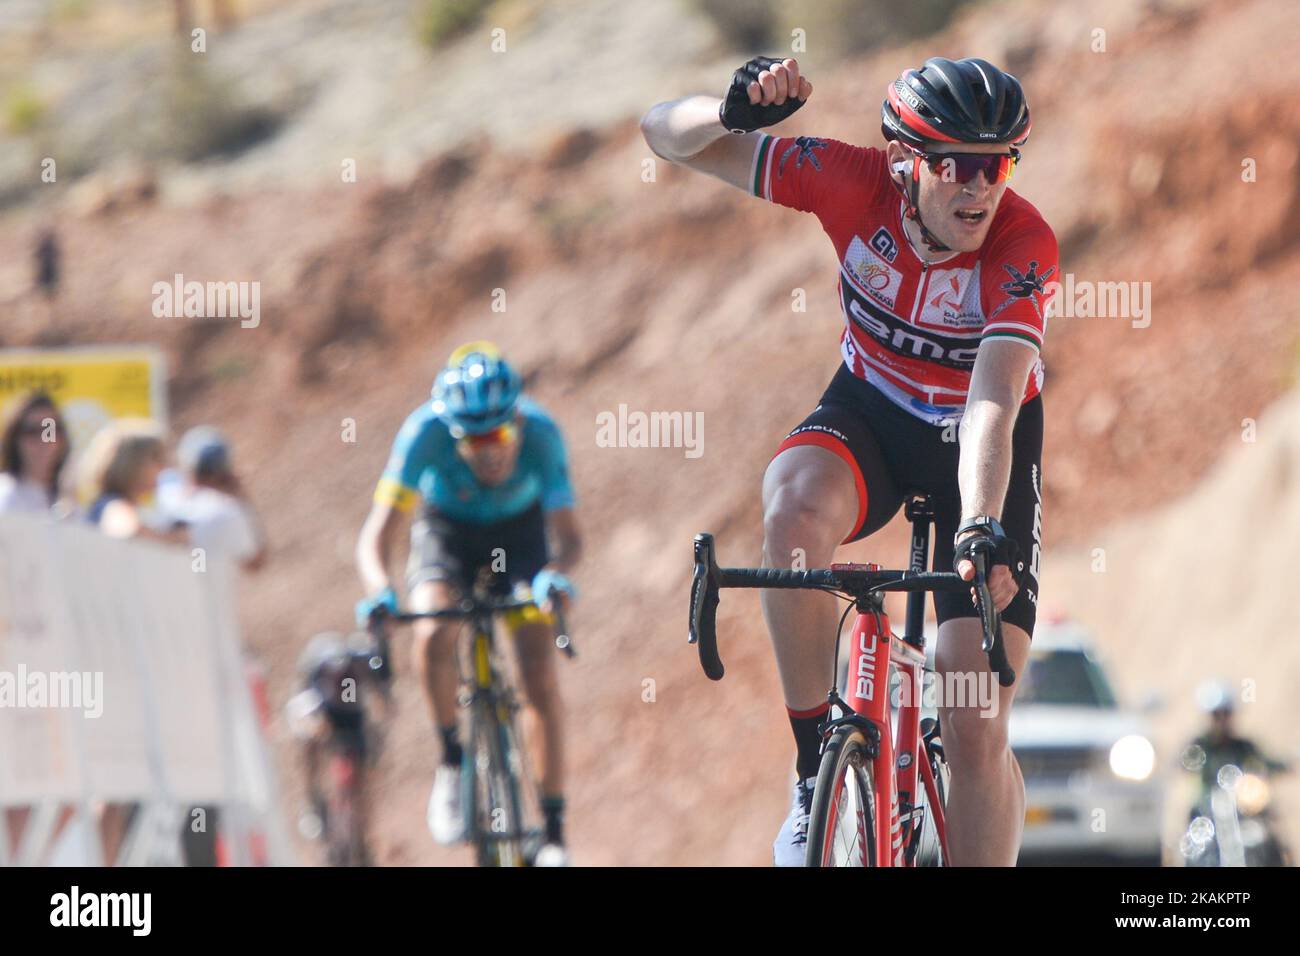 Ben HERMANS from BMC Racing Team, wins the fifth stage, a 152.5km from Sama'il to Jabal Al Akhdhar (Green Mountain), at the 2017 cycling Tour of Oman. On Saturday, February 18, 2017, in Jabal Al Akhdhar, Ad Dakhiliyah Region, Oman. Photo by Artur Widak *** Please Use Credit from Credit Field ***  Stock Photo